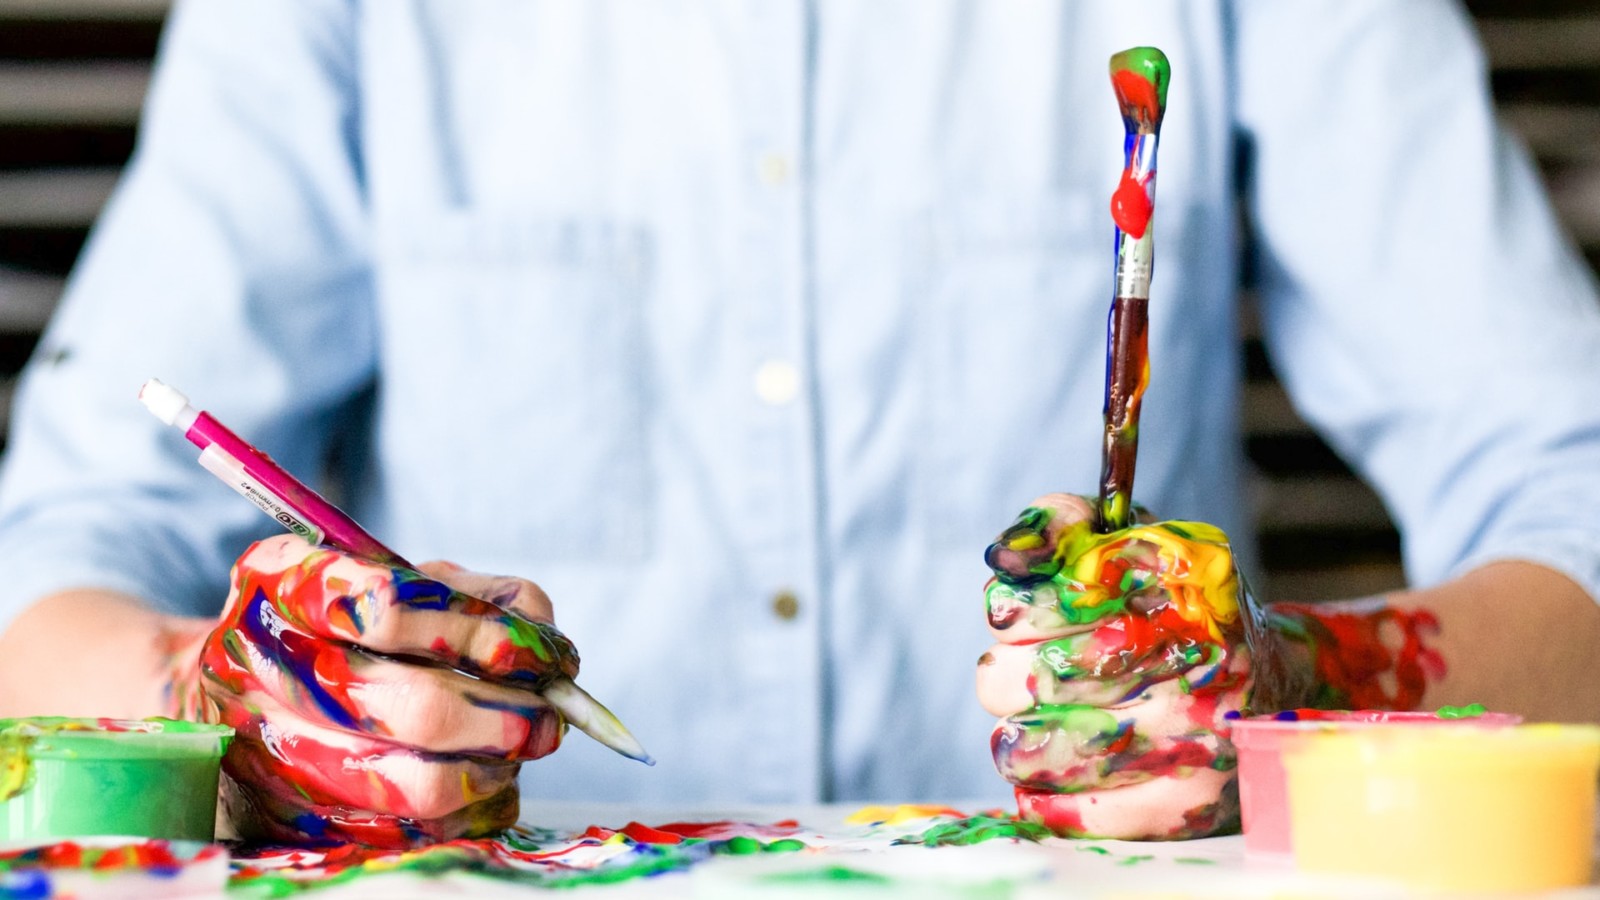 5 Effective Ways Art Can Help You Relieve Stress